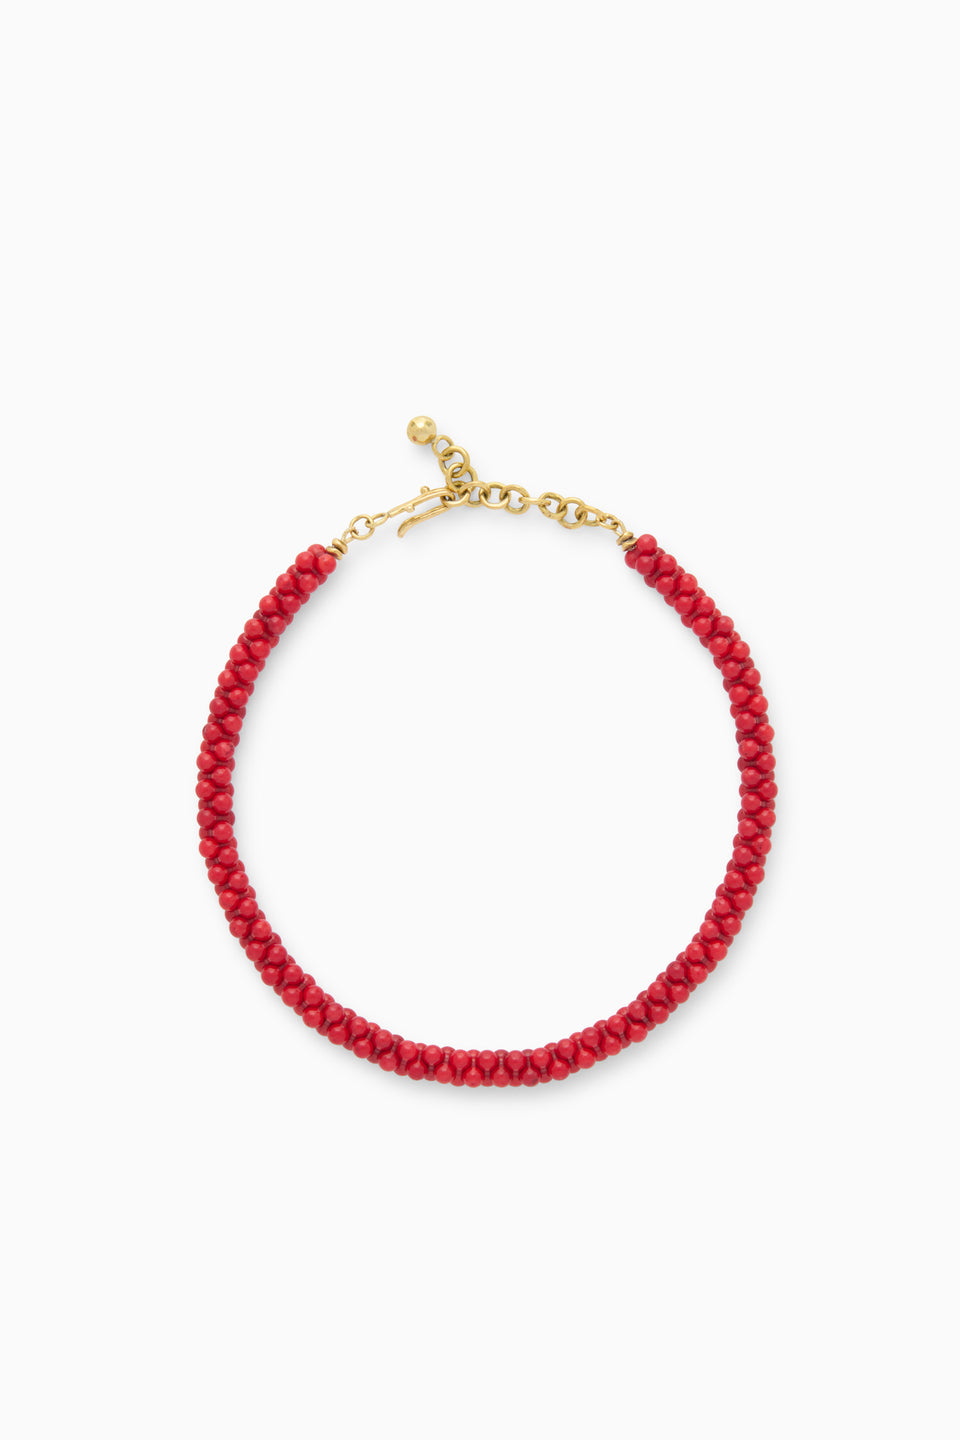 Bubble Coral Necklace - Carnation Coral